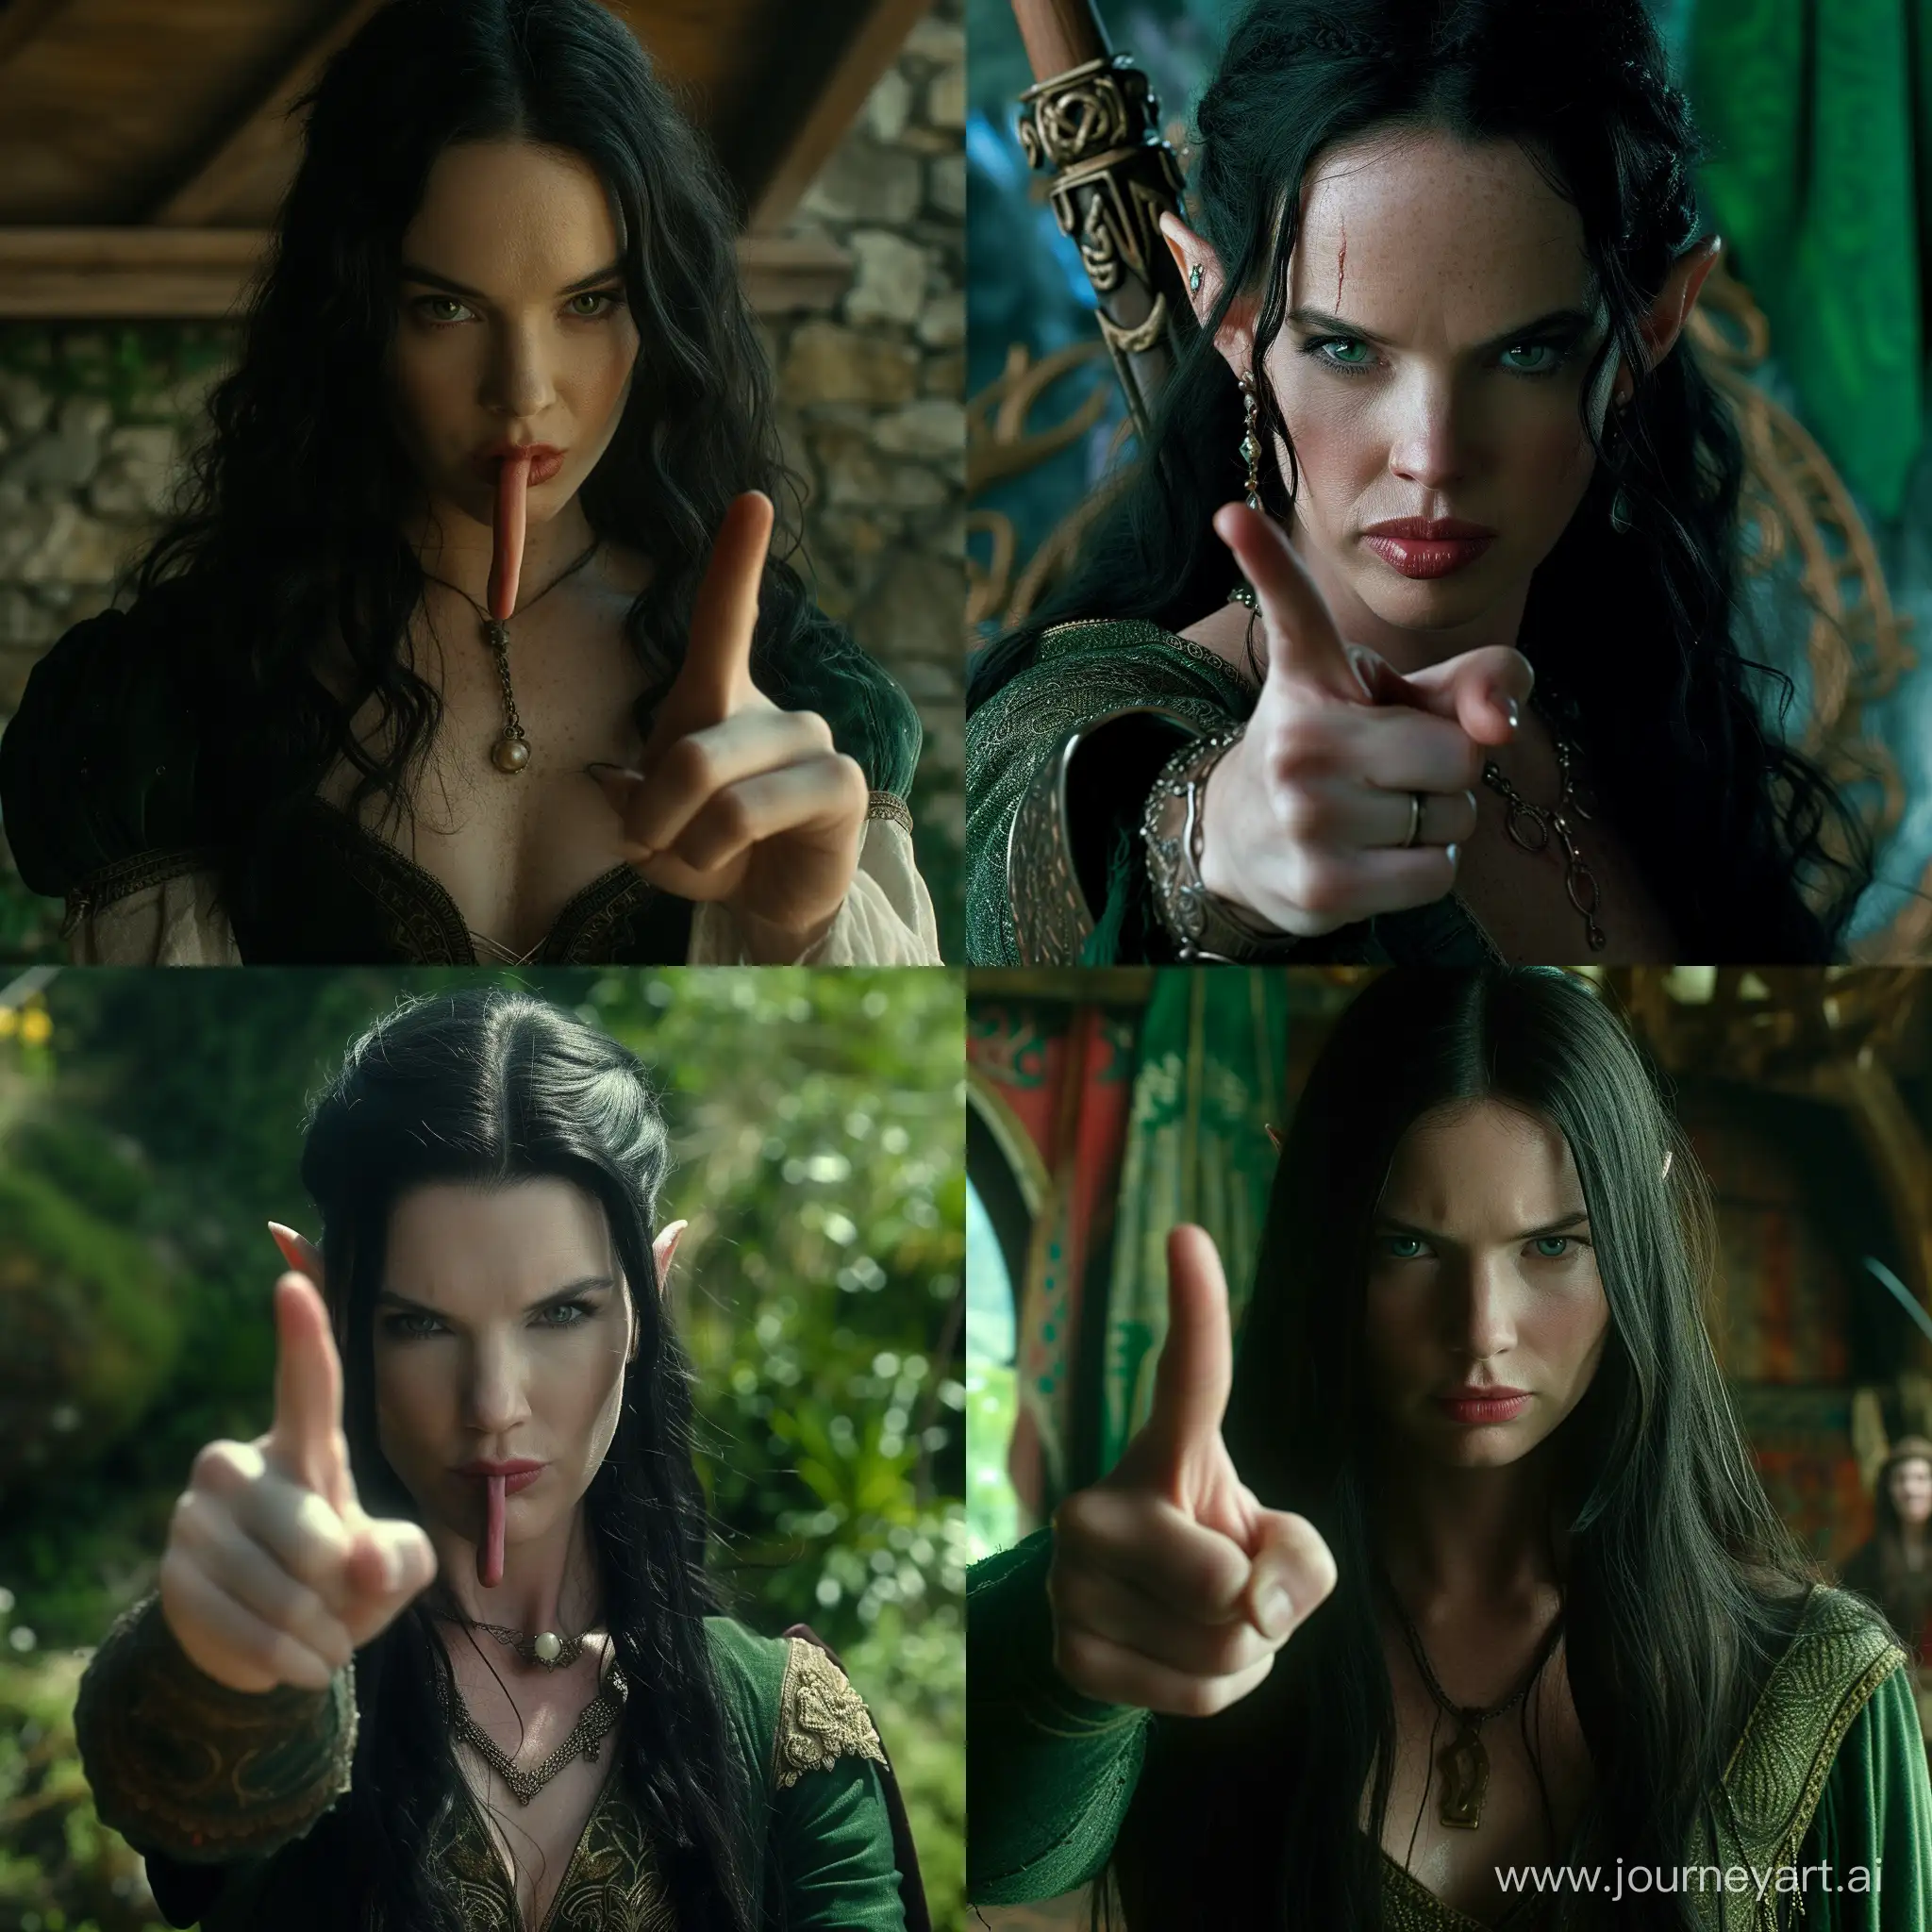 Fantasy-Movie-Scene-Krysten-Ritter-as-an-Elf-Defiantly-Confronts-King-Max-Brown